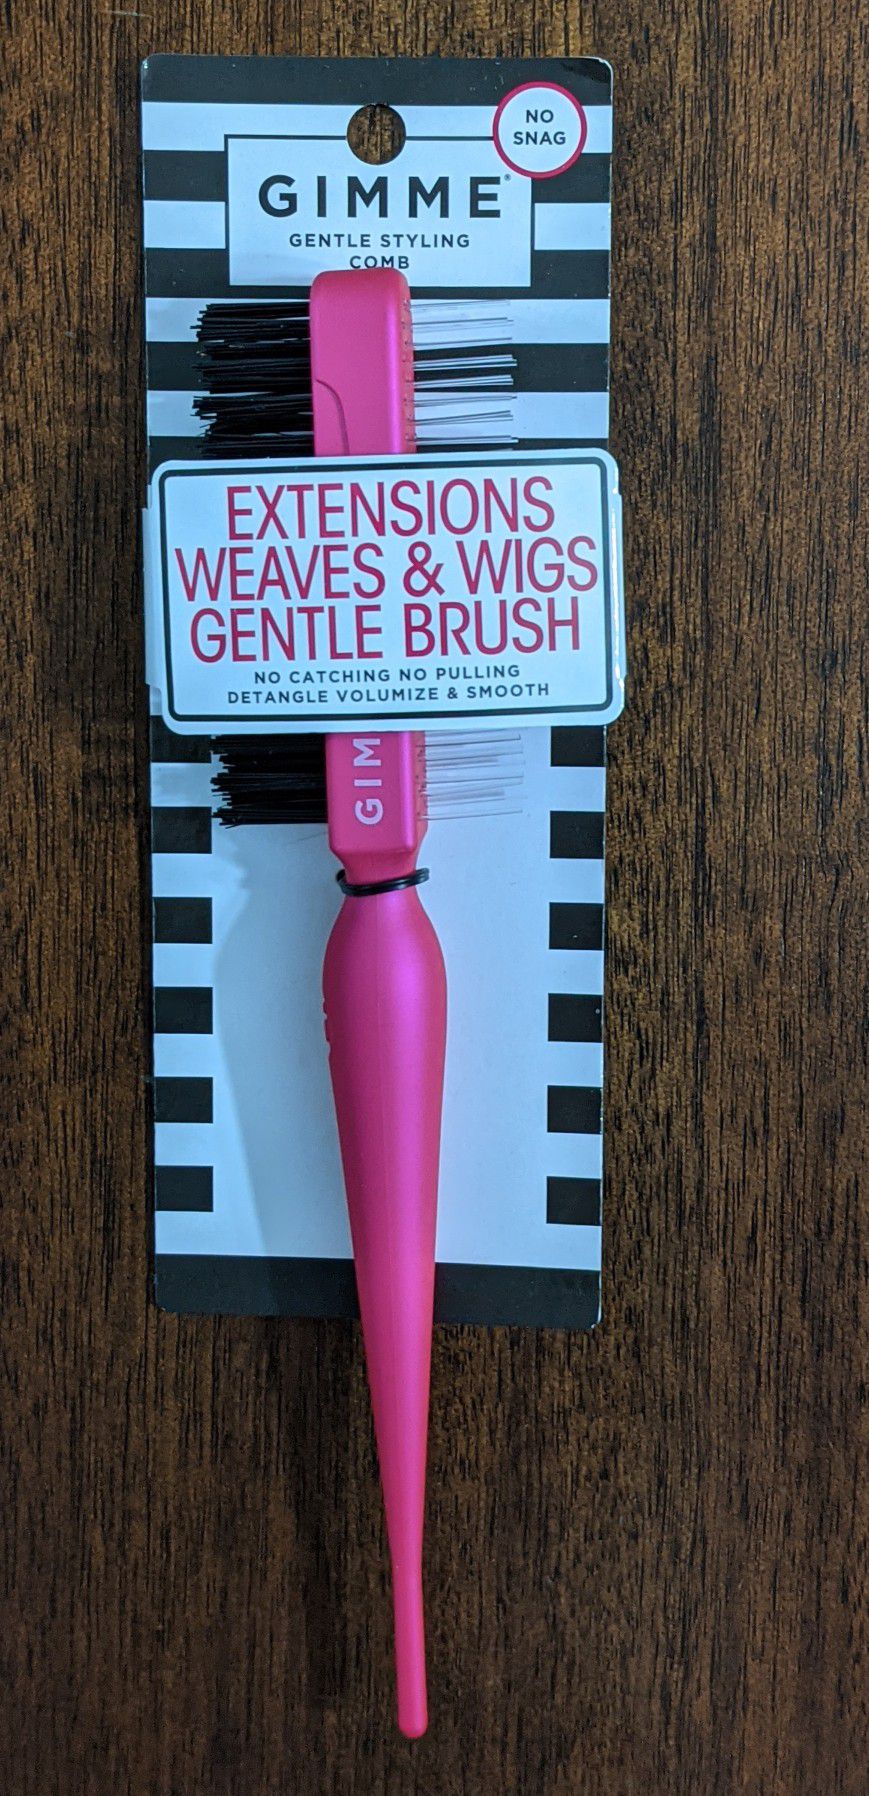 GIMME PINK GENTLE STYLING COMB DETANGLE BRUSH (EXTENSIONS, WEAVES, &WIGS GENTLE BRUSH)